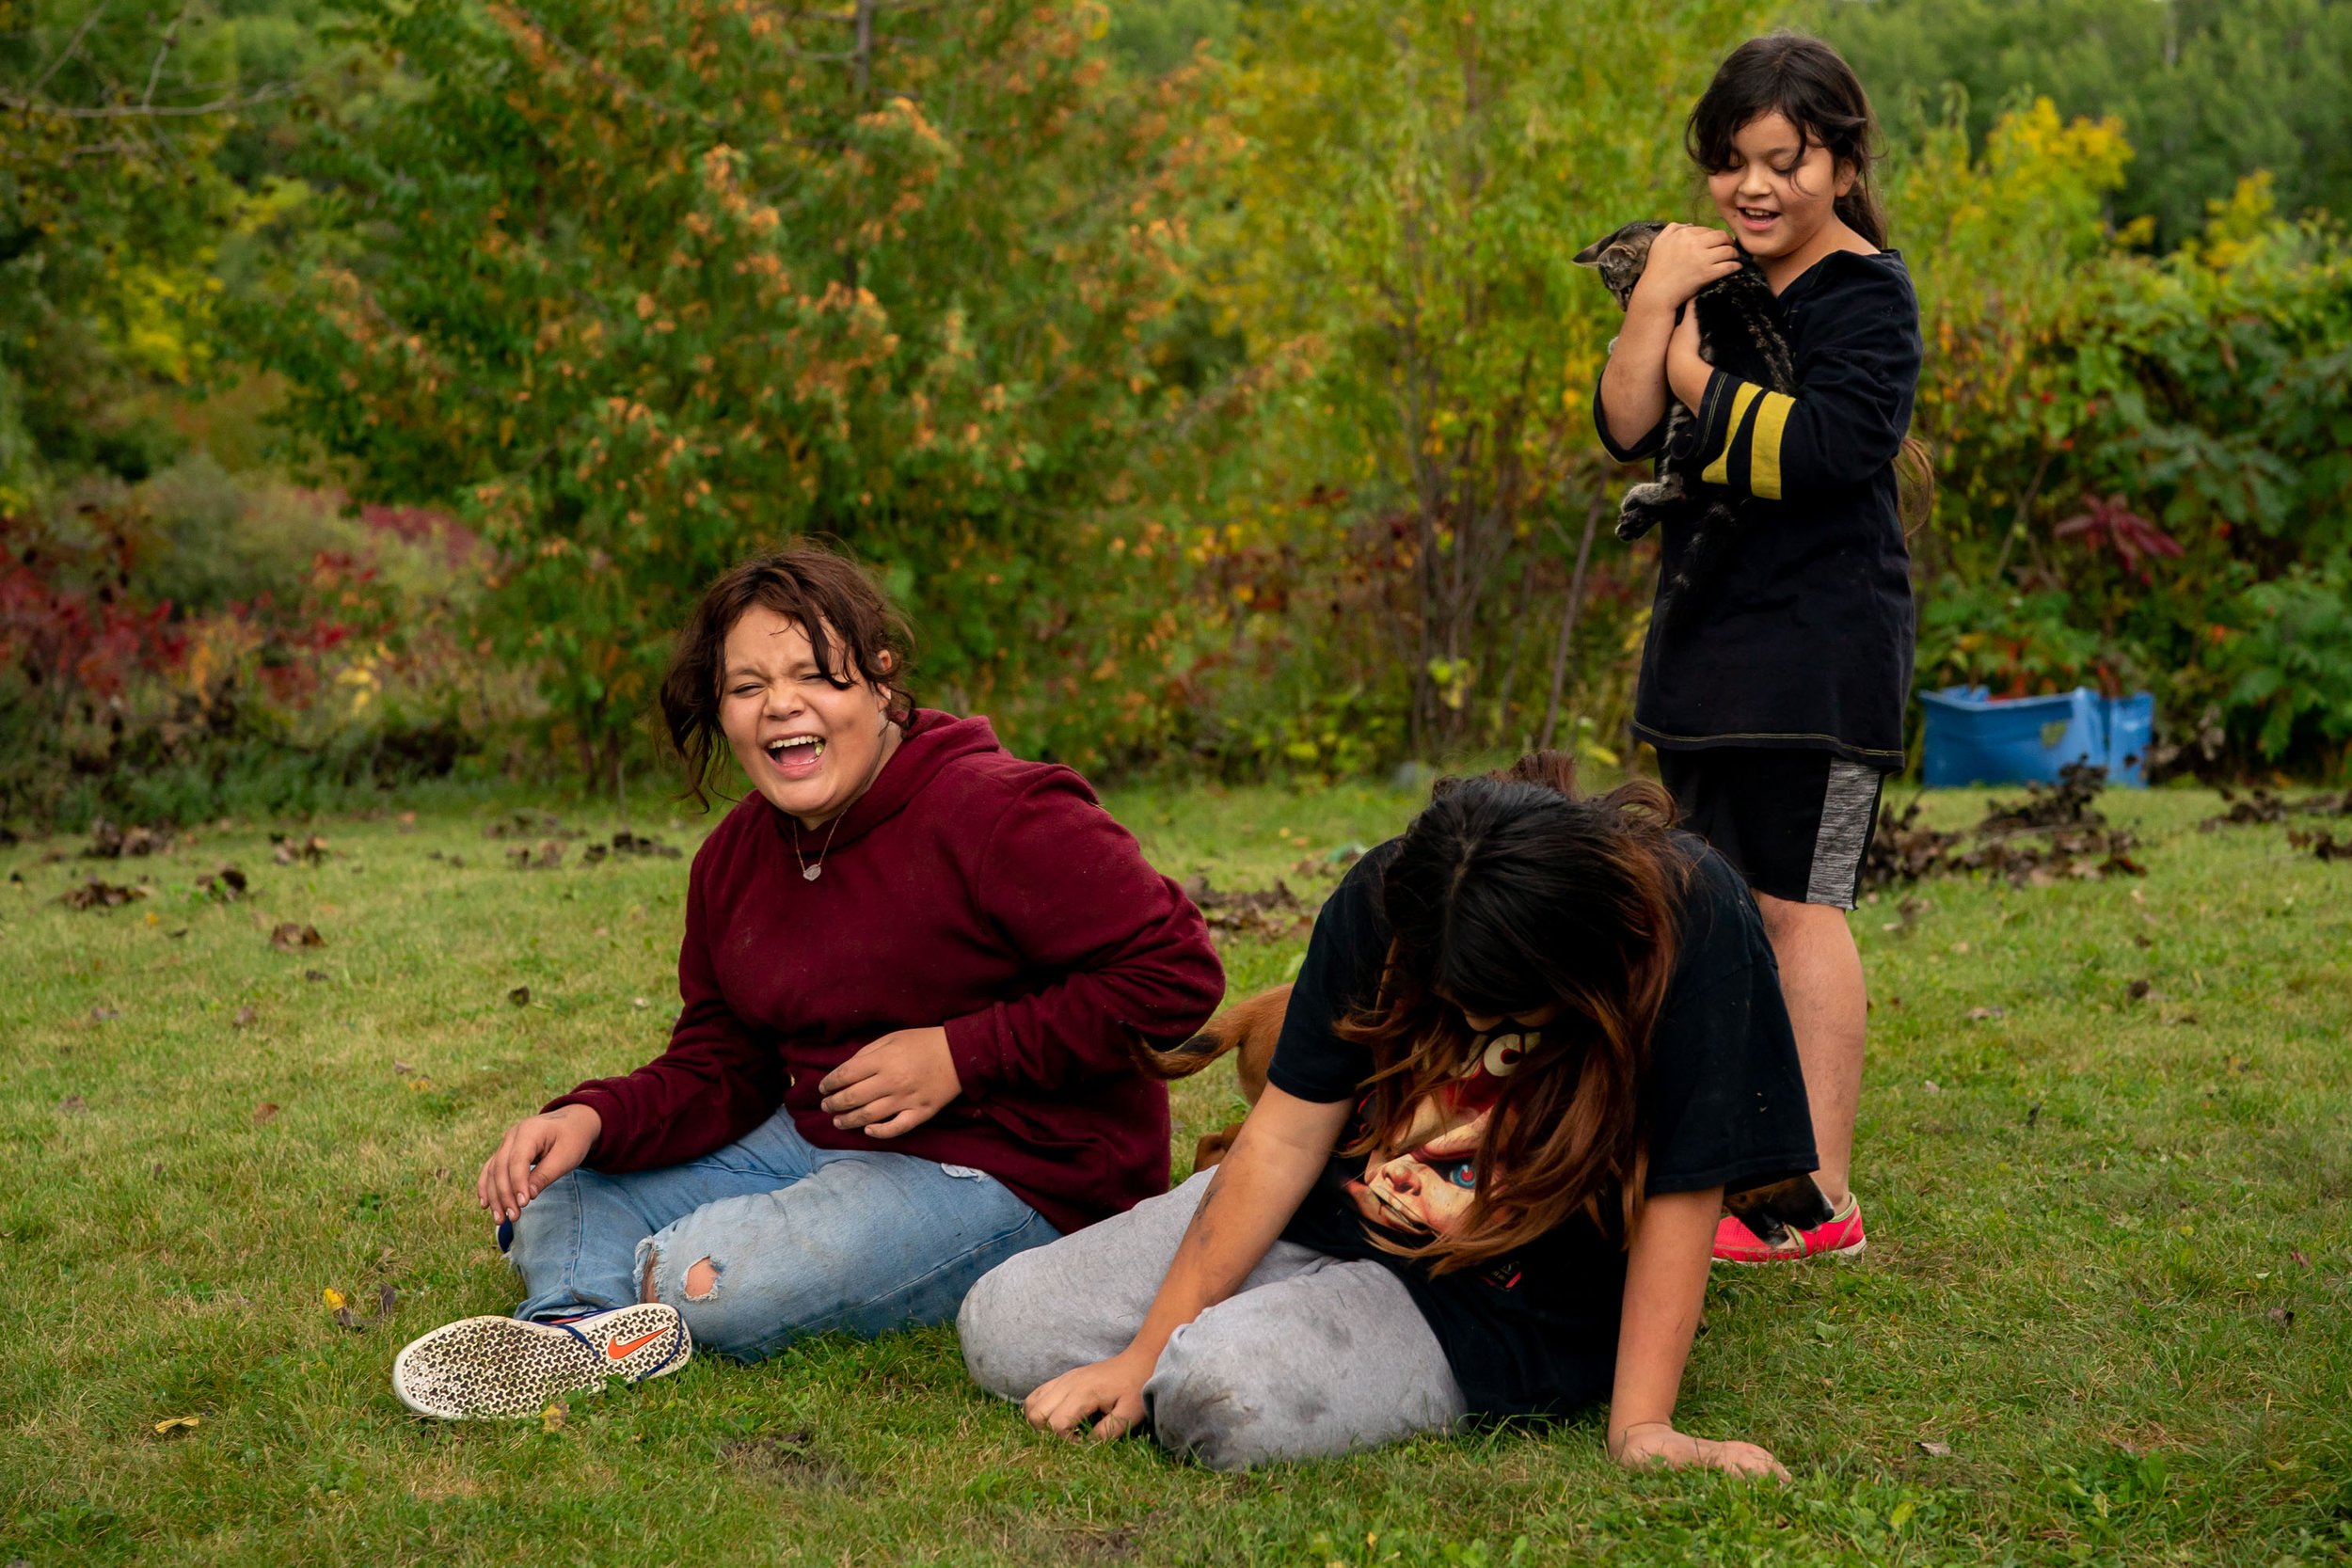  Maryjane Shimek, 12, left, shares a laugh with her family members Trishell Thompson, 11, and Aleecia Azure, 9, near their home in the White Earth community Sept. 24, 2022 on the White Earth Reservation. Maryjane is undergoing a berry fast, which is 